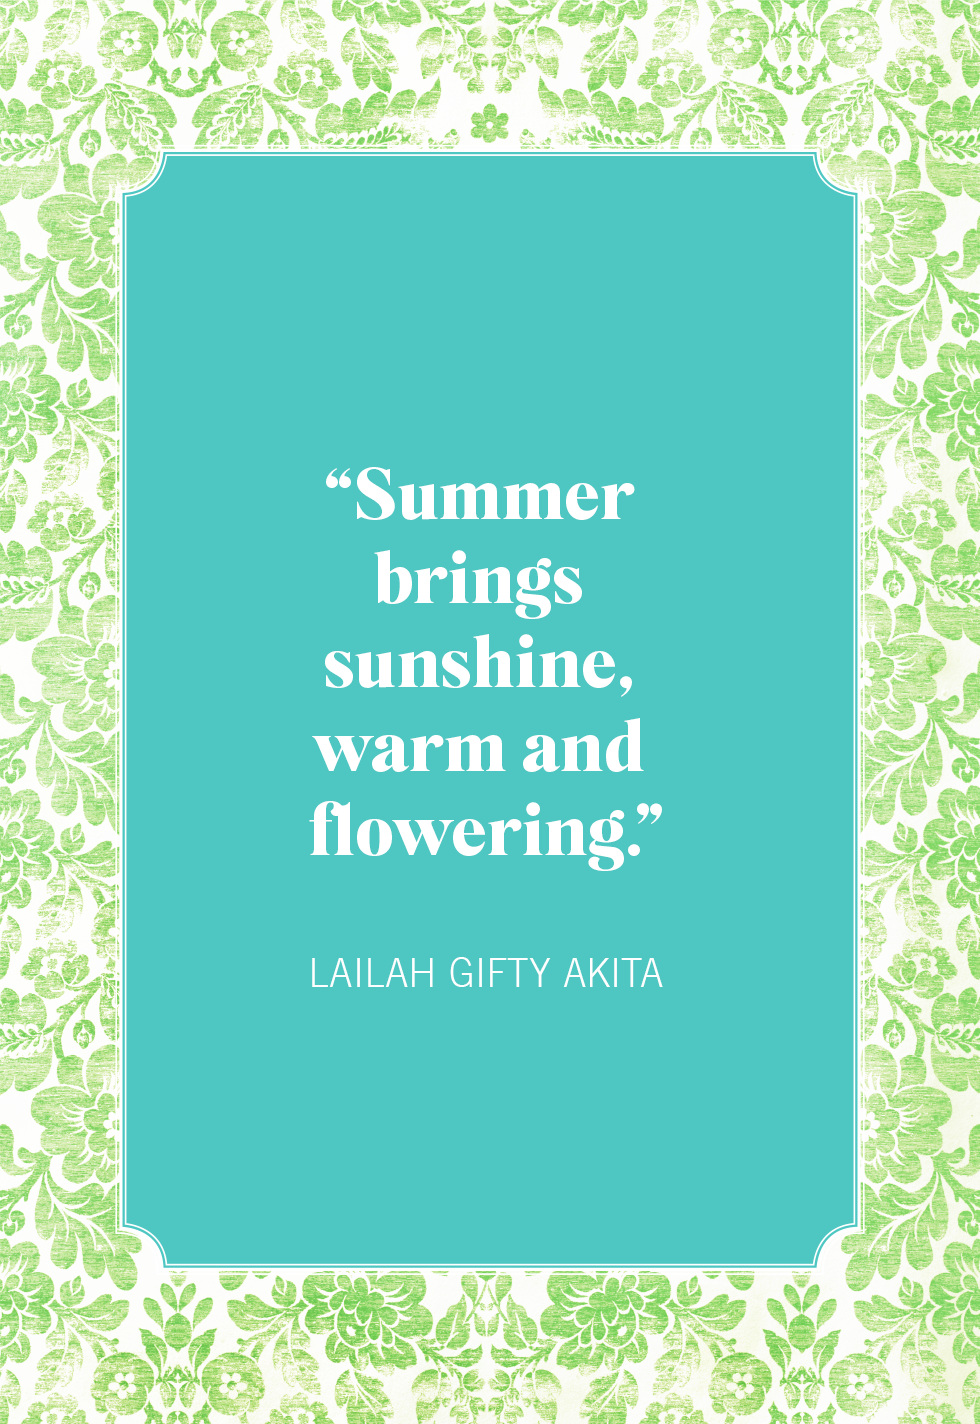 75 Best Summer Quotes - Short, Funny, and Cute Quotes About Summer